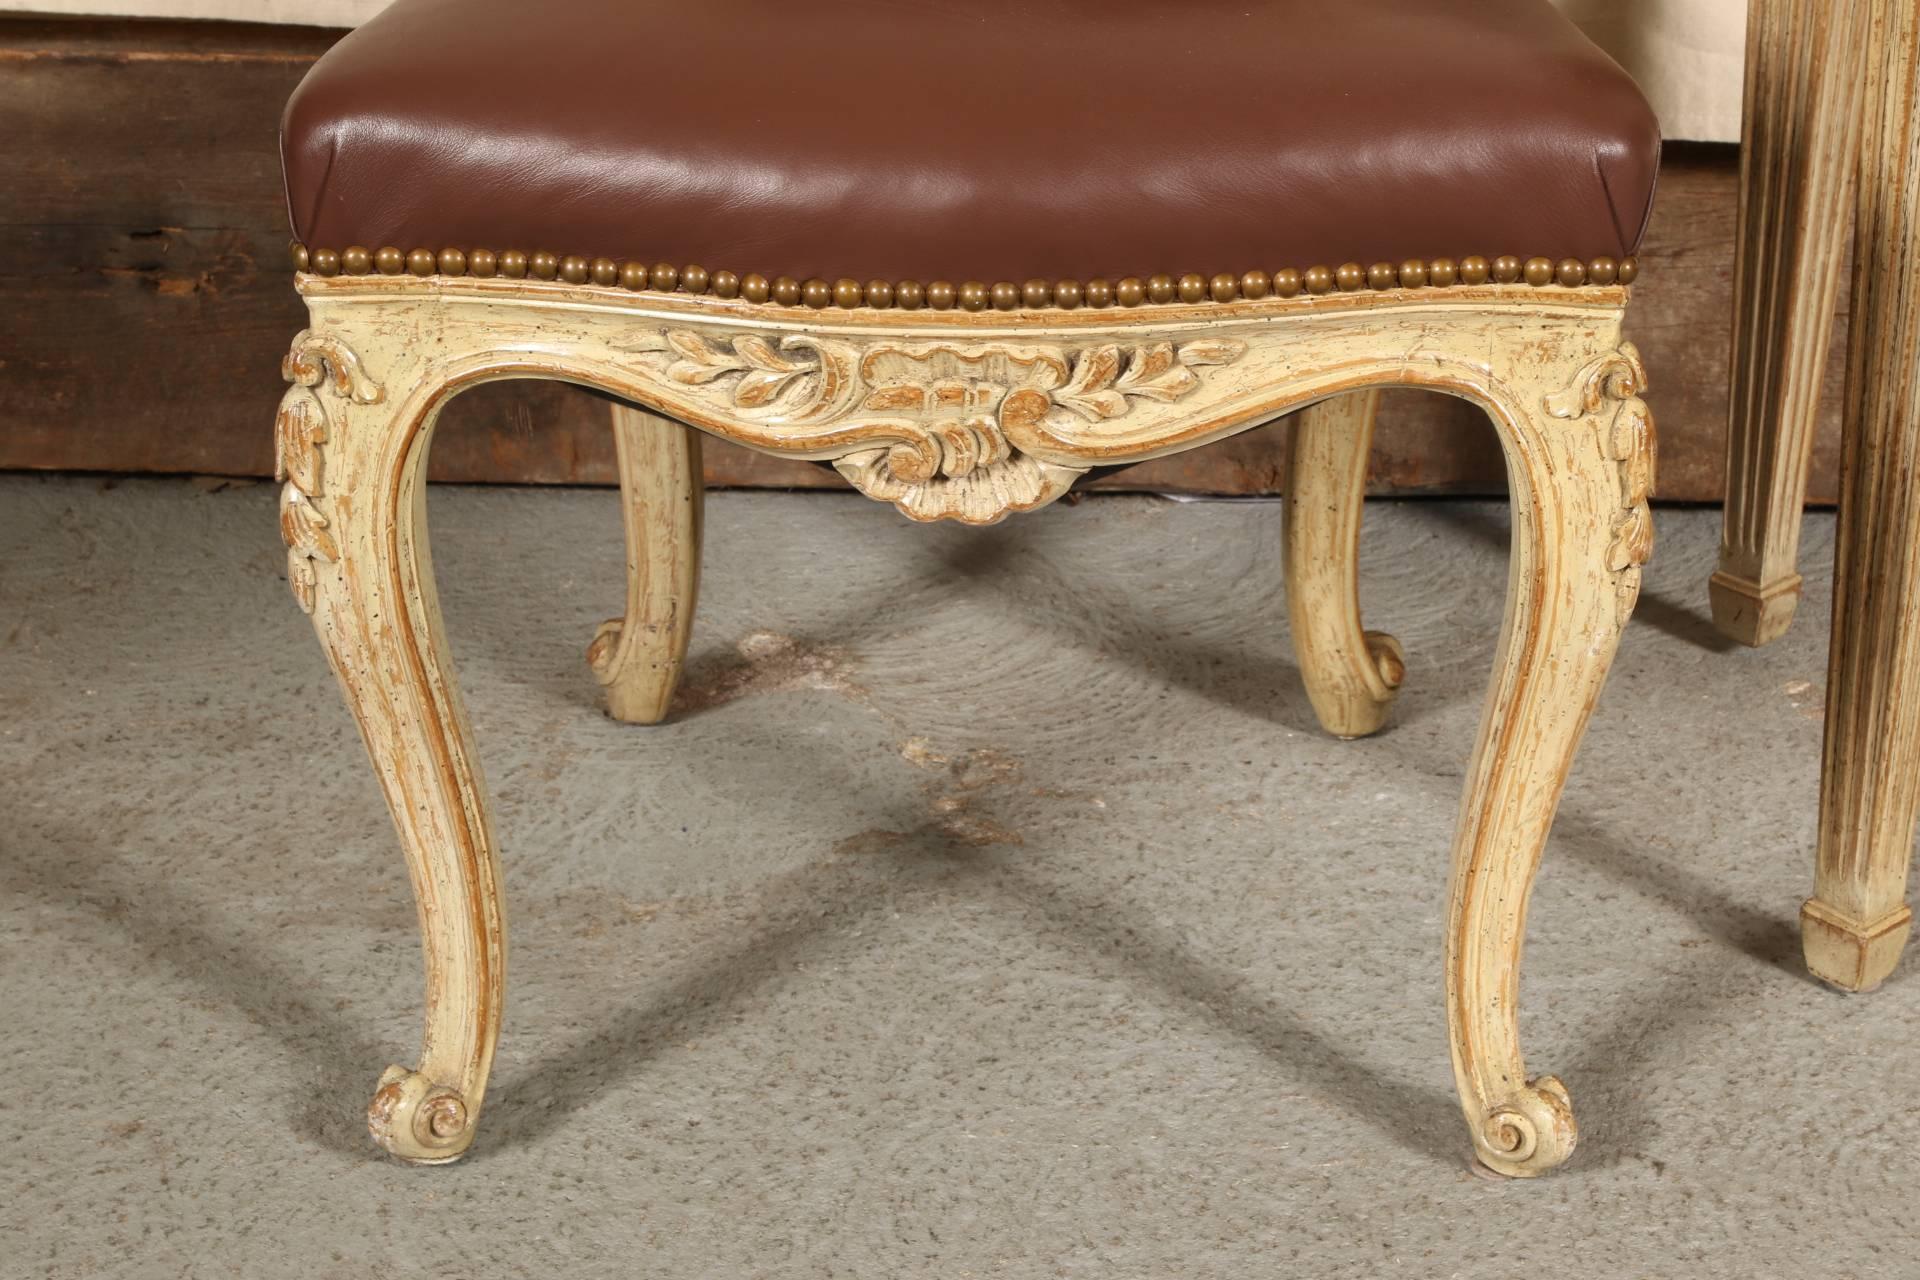 By Auffray & Co. Louis XVI style desk in cream paint with carved shaped apron with foliate decoration, raised on tapering square reeded legs. Along with a Louis XV style side chair in cream paint with carved foliate decoration and brown leather seat